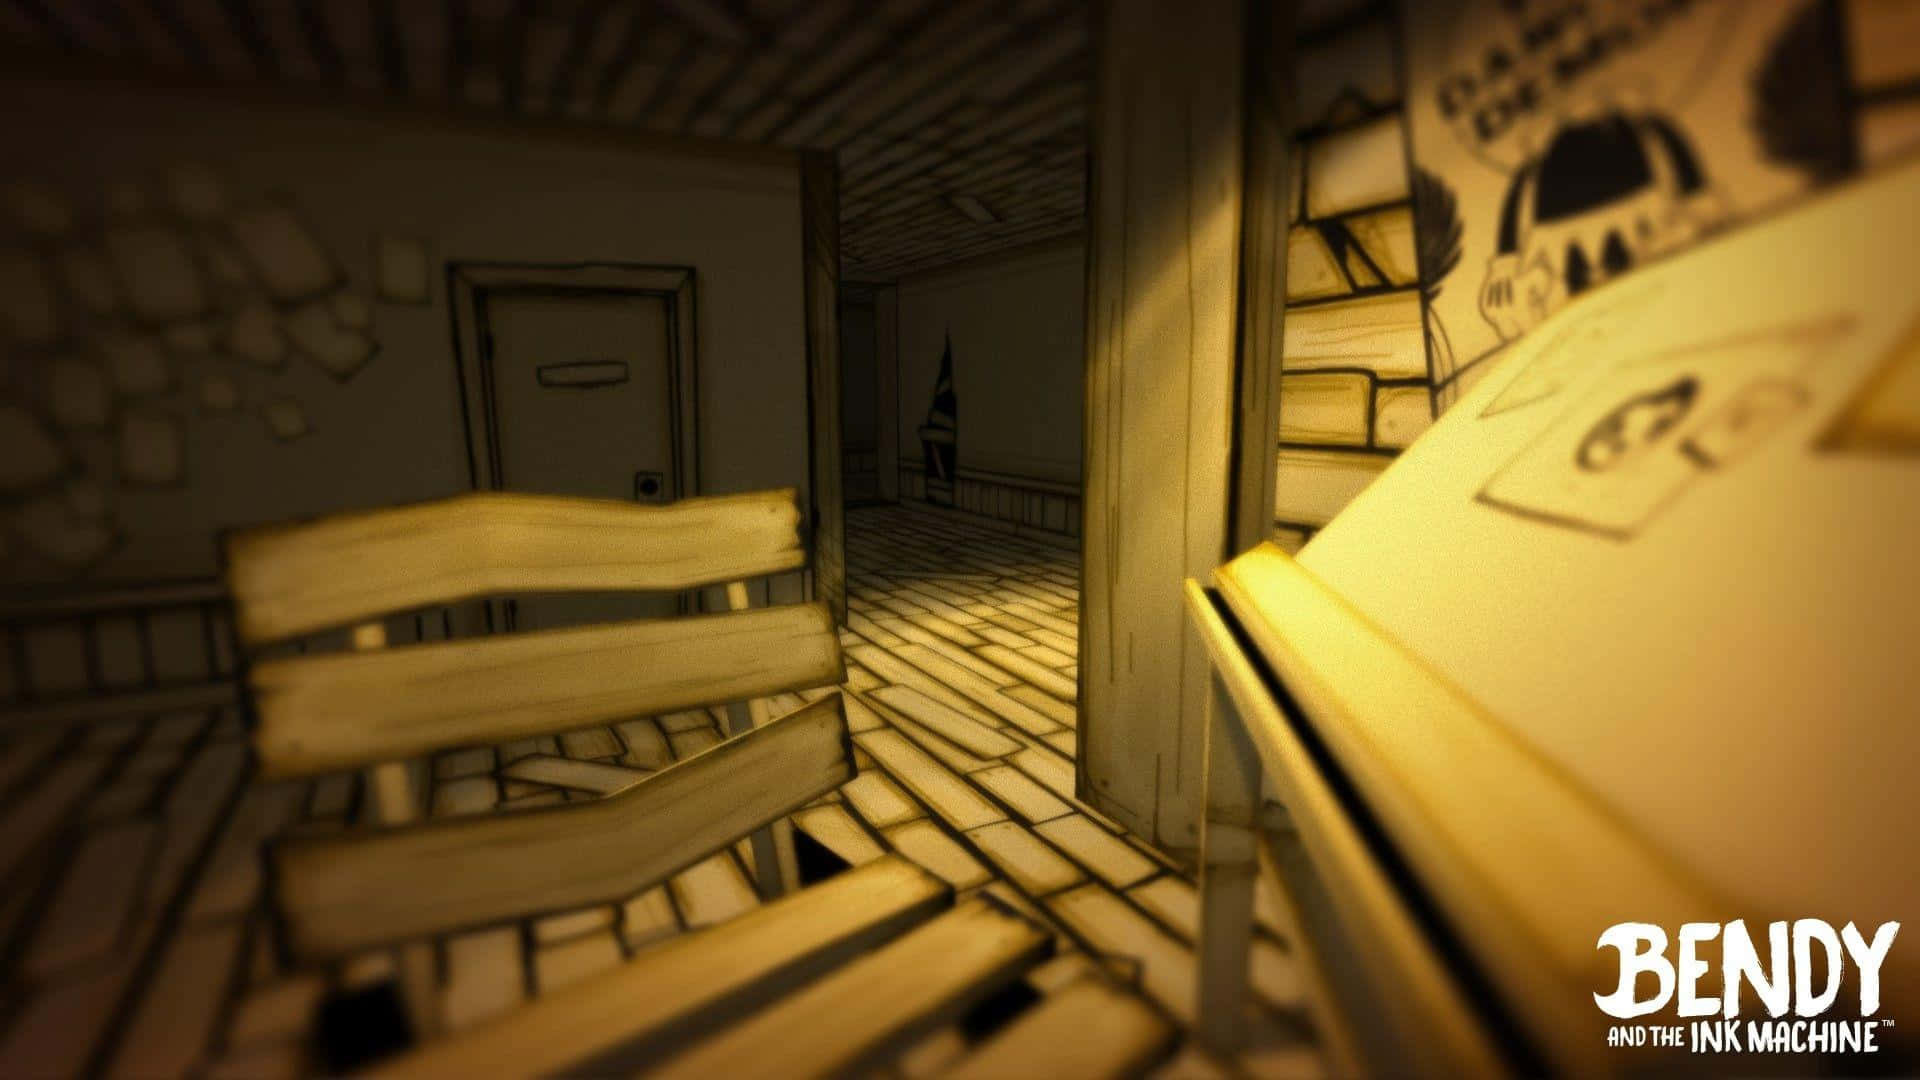 Enter the dark, eerie world of Bendy and the Ink Machine. Wallpaper